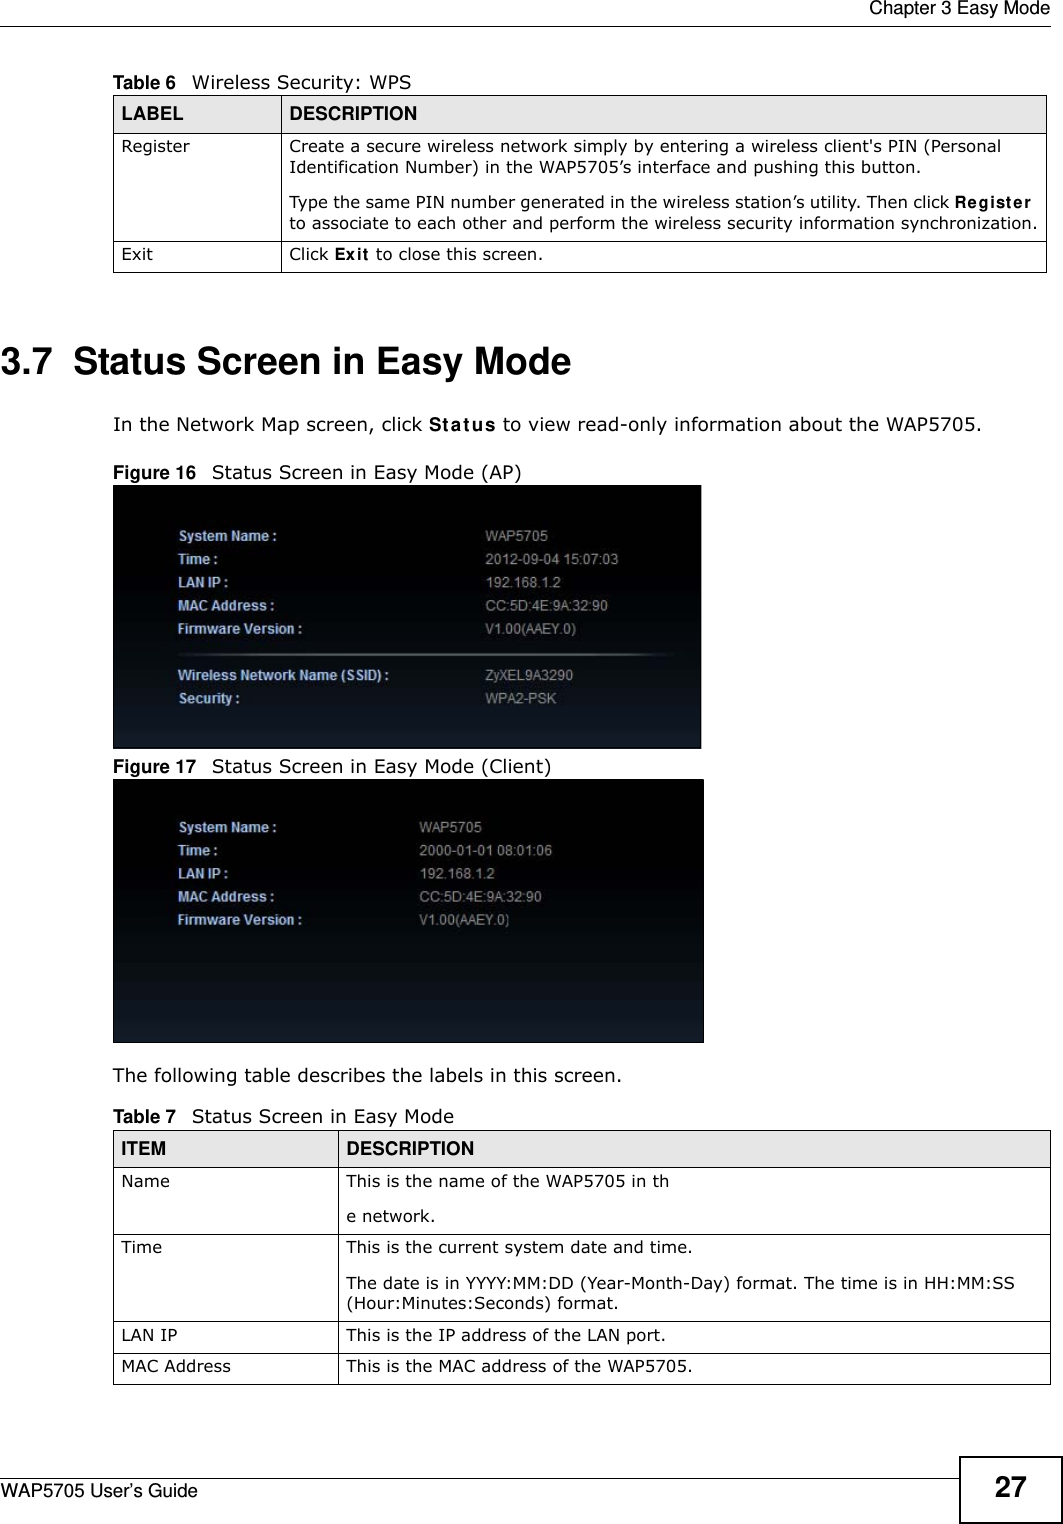  Chapter 3 Easy ModeWAP5705 User’s Guide 273.7  Status Screen in Easy ModeIn the Network Map screen, click St a t u s to view read-only information about the WAP5705.Figure 16   Status Screen in Easy Mode (AP) Figure 17   Status Screen in Easy Mode (Client) The following table describes the labels in this screen. Register Create a secure wireless network simply by entering a wireless client&apos;s PIN (Personal Identification Number) in the WAP5705’s interface and pushing this button.Type the same PIN number generated in the wireless station’s utility. Then click Re g ist e r  to associate to each other and perform the wireless security information synchronization.Exit Click Ex it to close this screen.Table 6   Wireless Security: WPSLABEL DESCRIPTIONTable 7   Status Screen in Easy ModeITEM DESCRIPTIONName This is the name of the WAP5705 in the network. Time This is the current system date and time.The date is in YYYY:MM:DD (Year-Month-Day) format. The time is in HH:MM:SS (Hour:Minutes:Seconds) format.LAN IP This is the IP address of the LAN port.MAC Address This is the MAC address of the WAP5705.